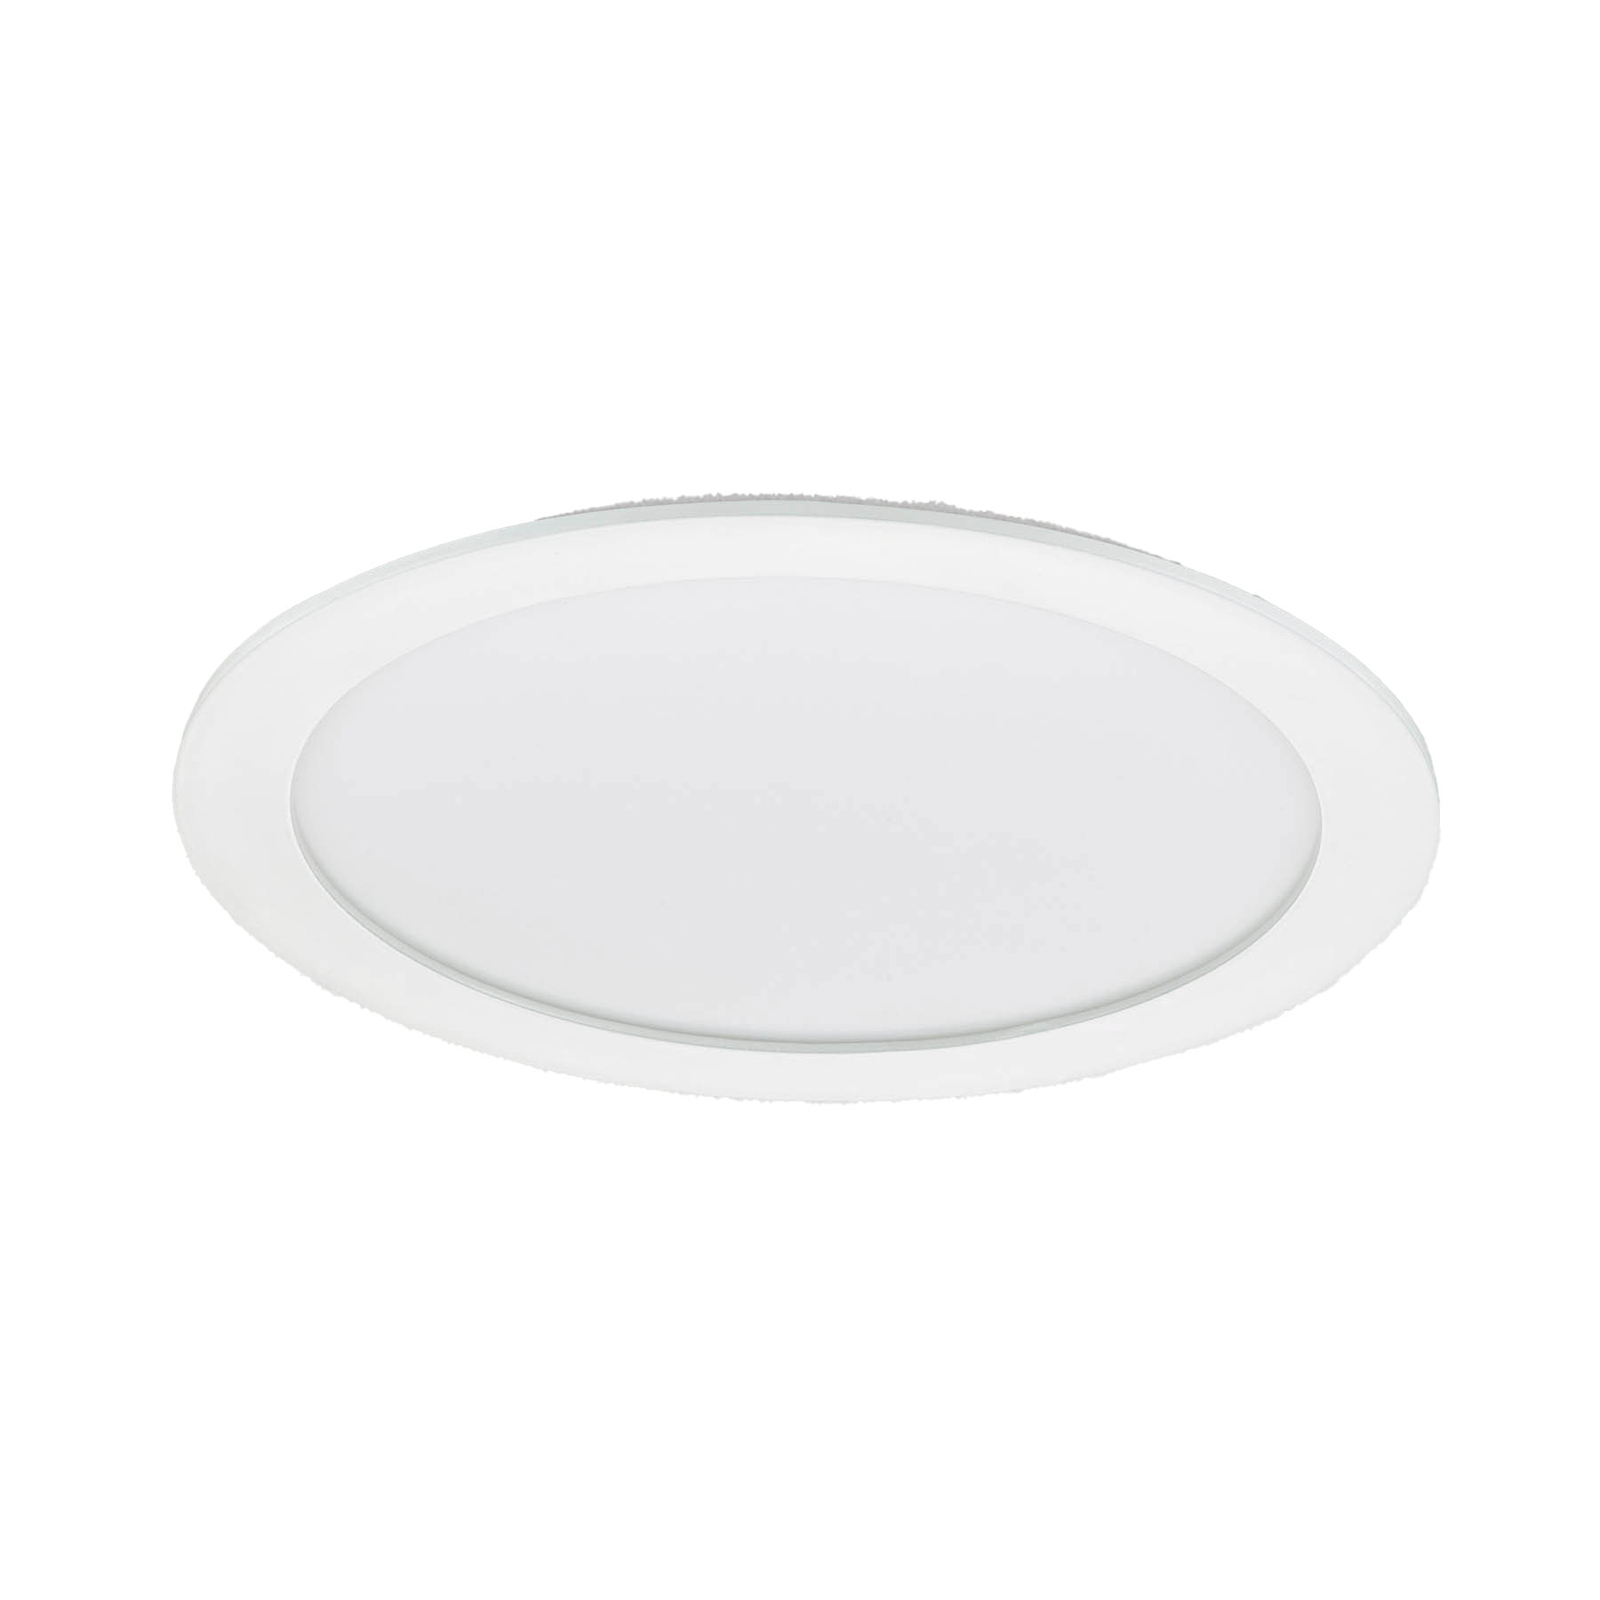 LED recessed downlight DN145B LED20S/830 PSU II WH